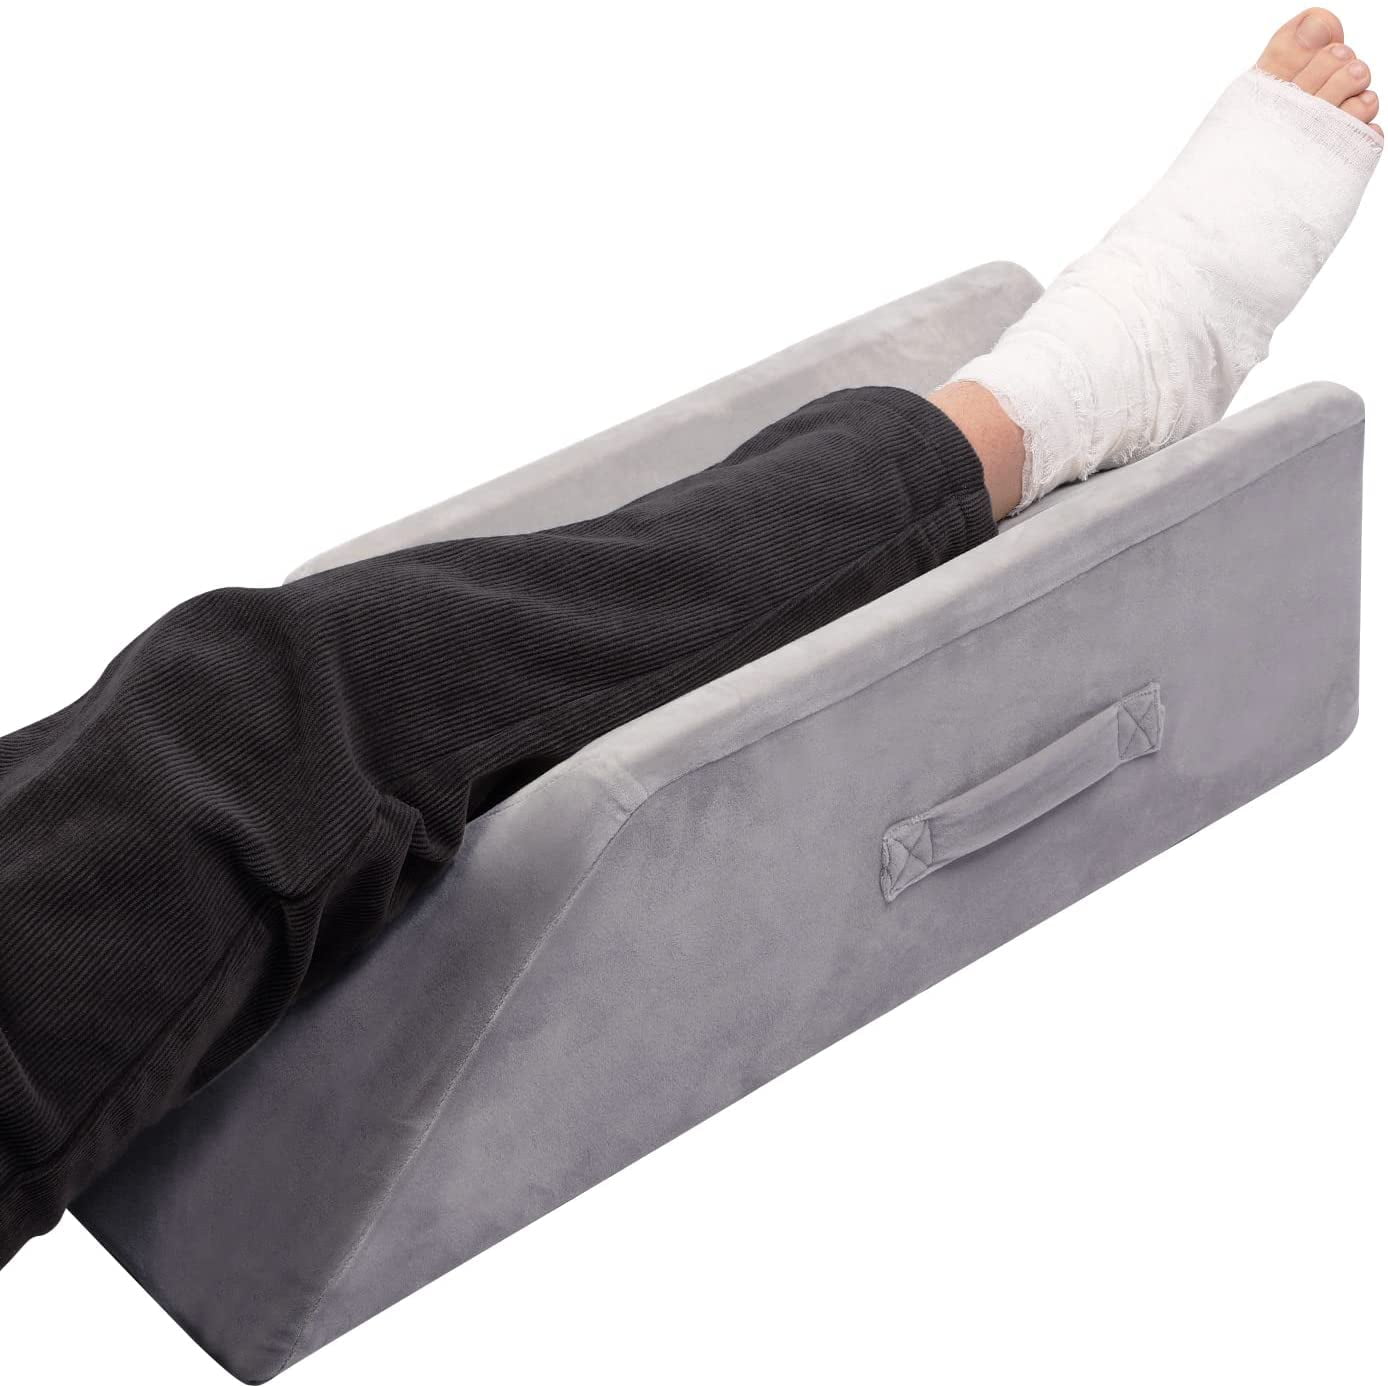 KingPavonini Leg Elevation Pillows 4-Height Adjustable Memory Foam for  Surgery, Injuries, Rest, Grey 